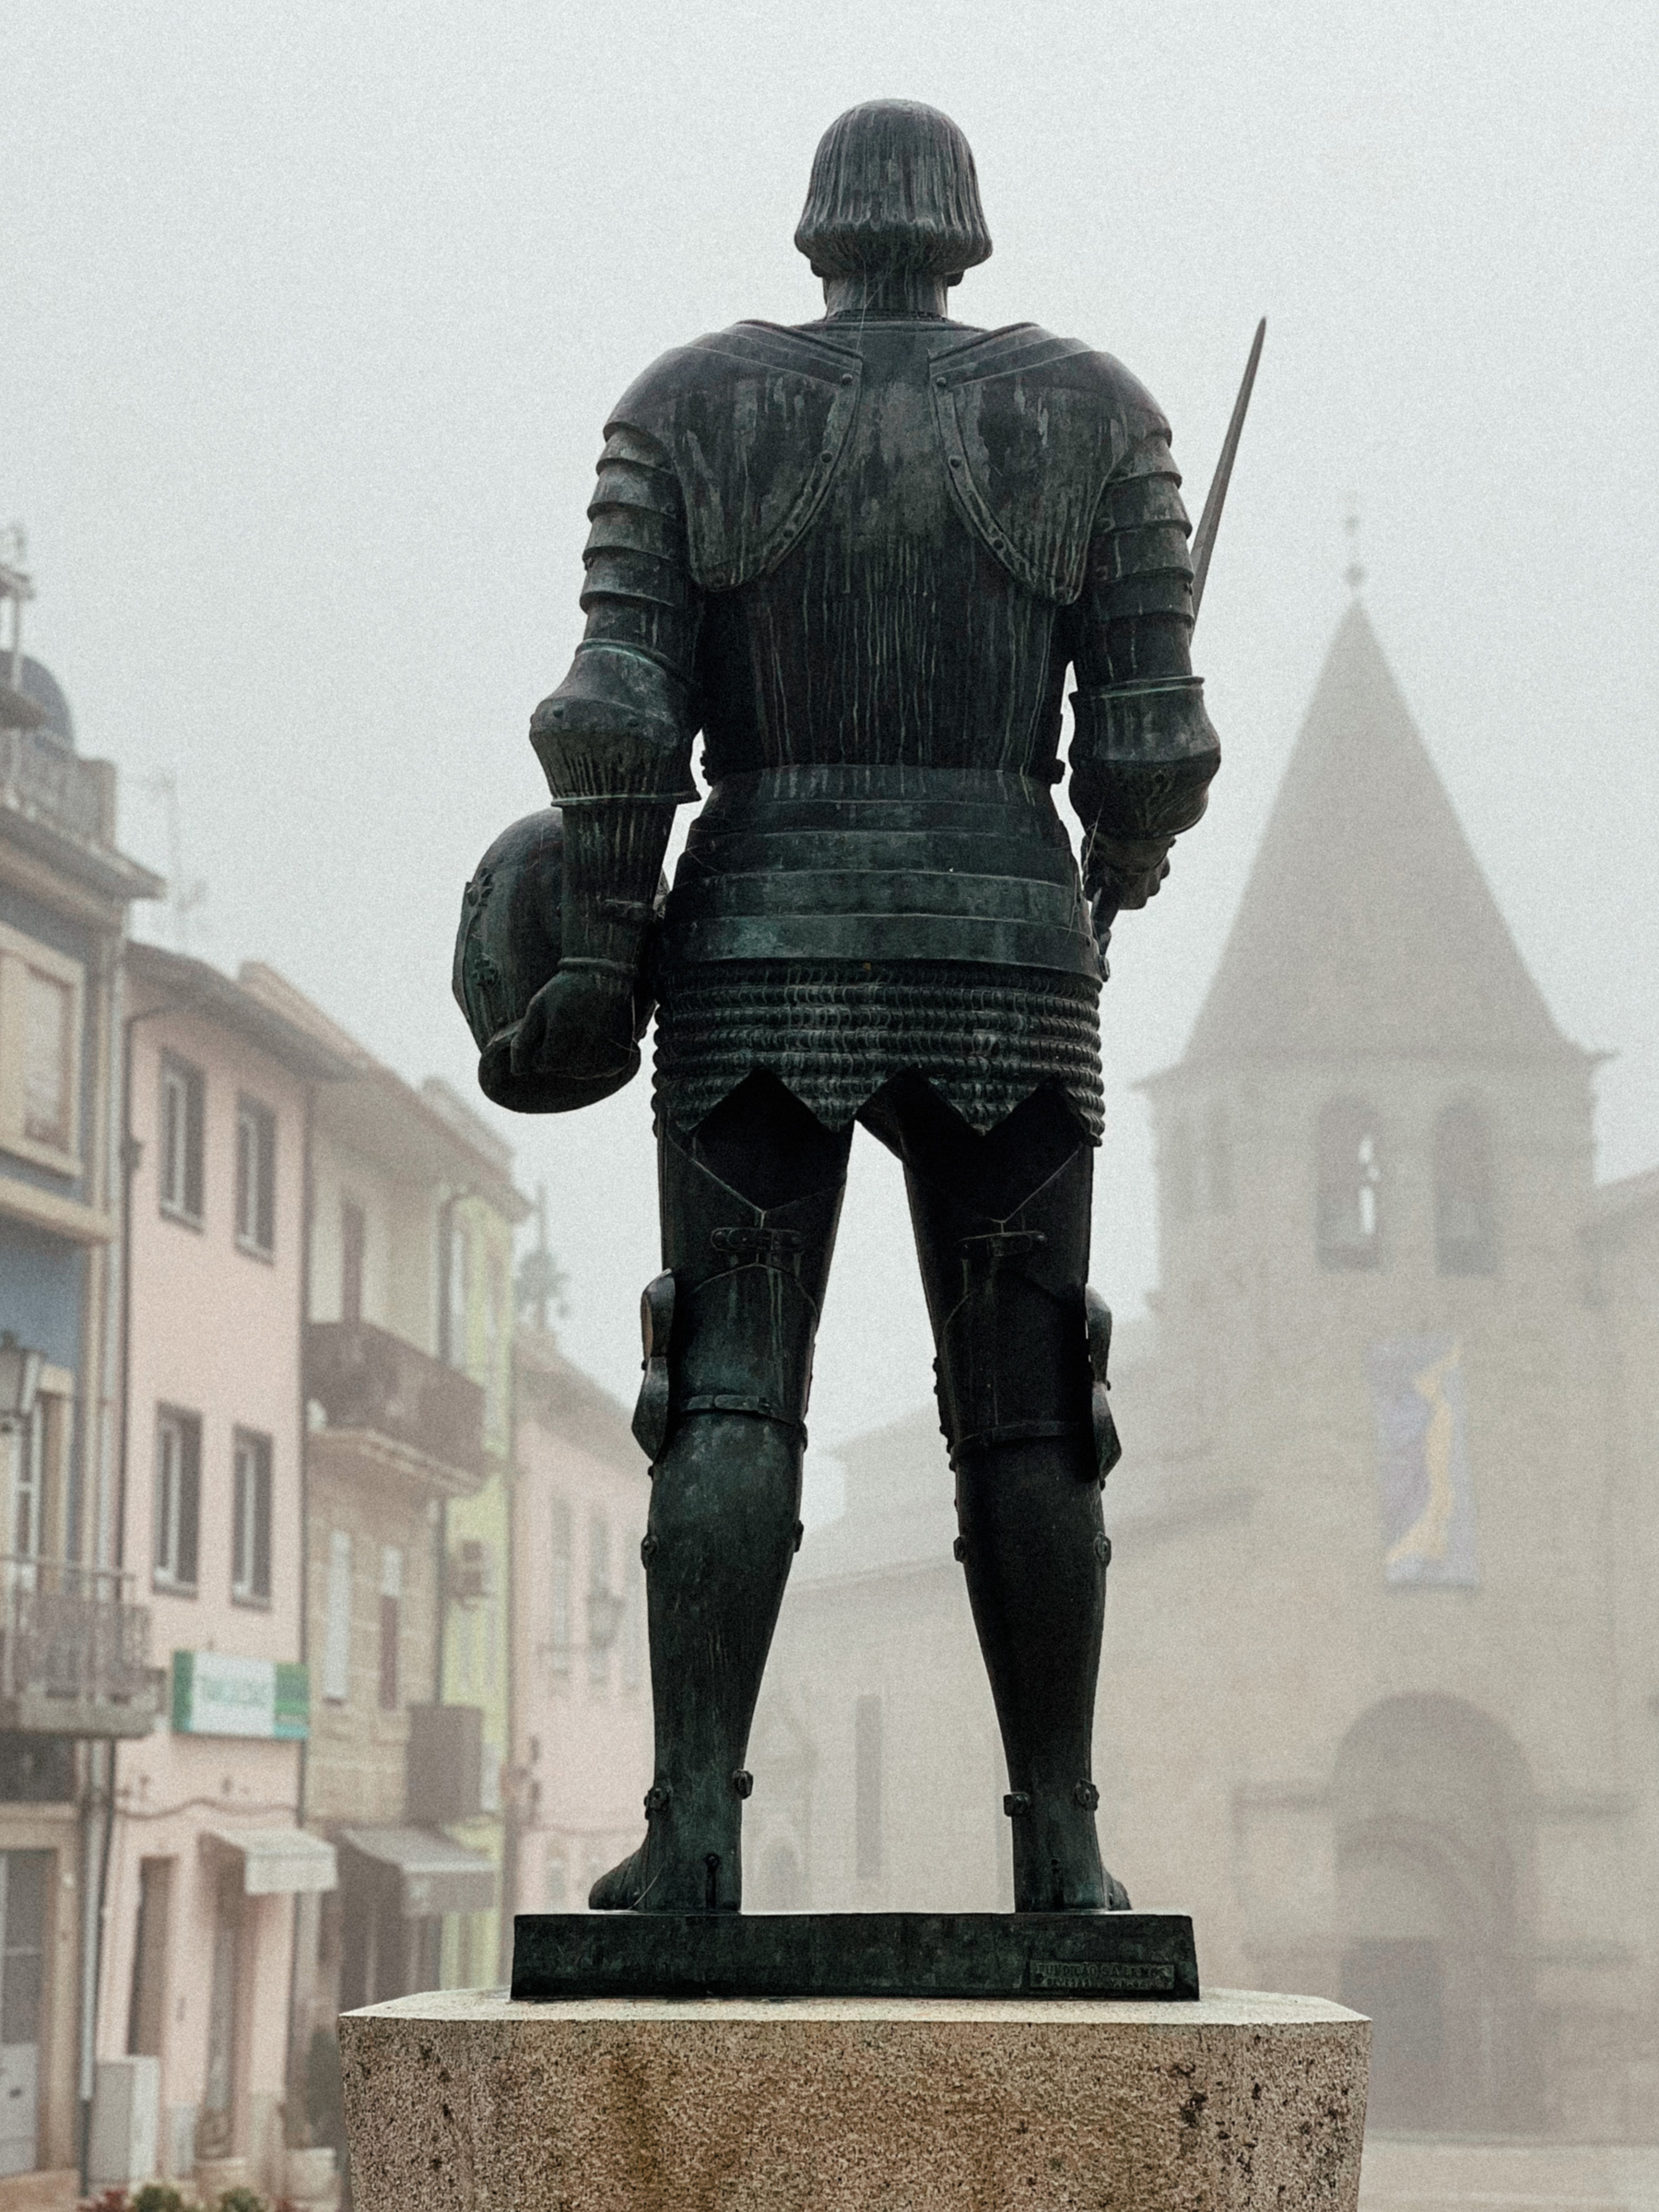 A statue stands in the middle of a square in the old part of town. 